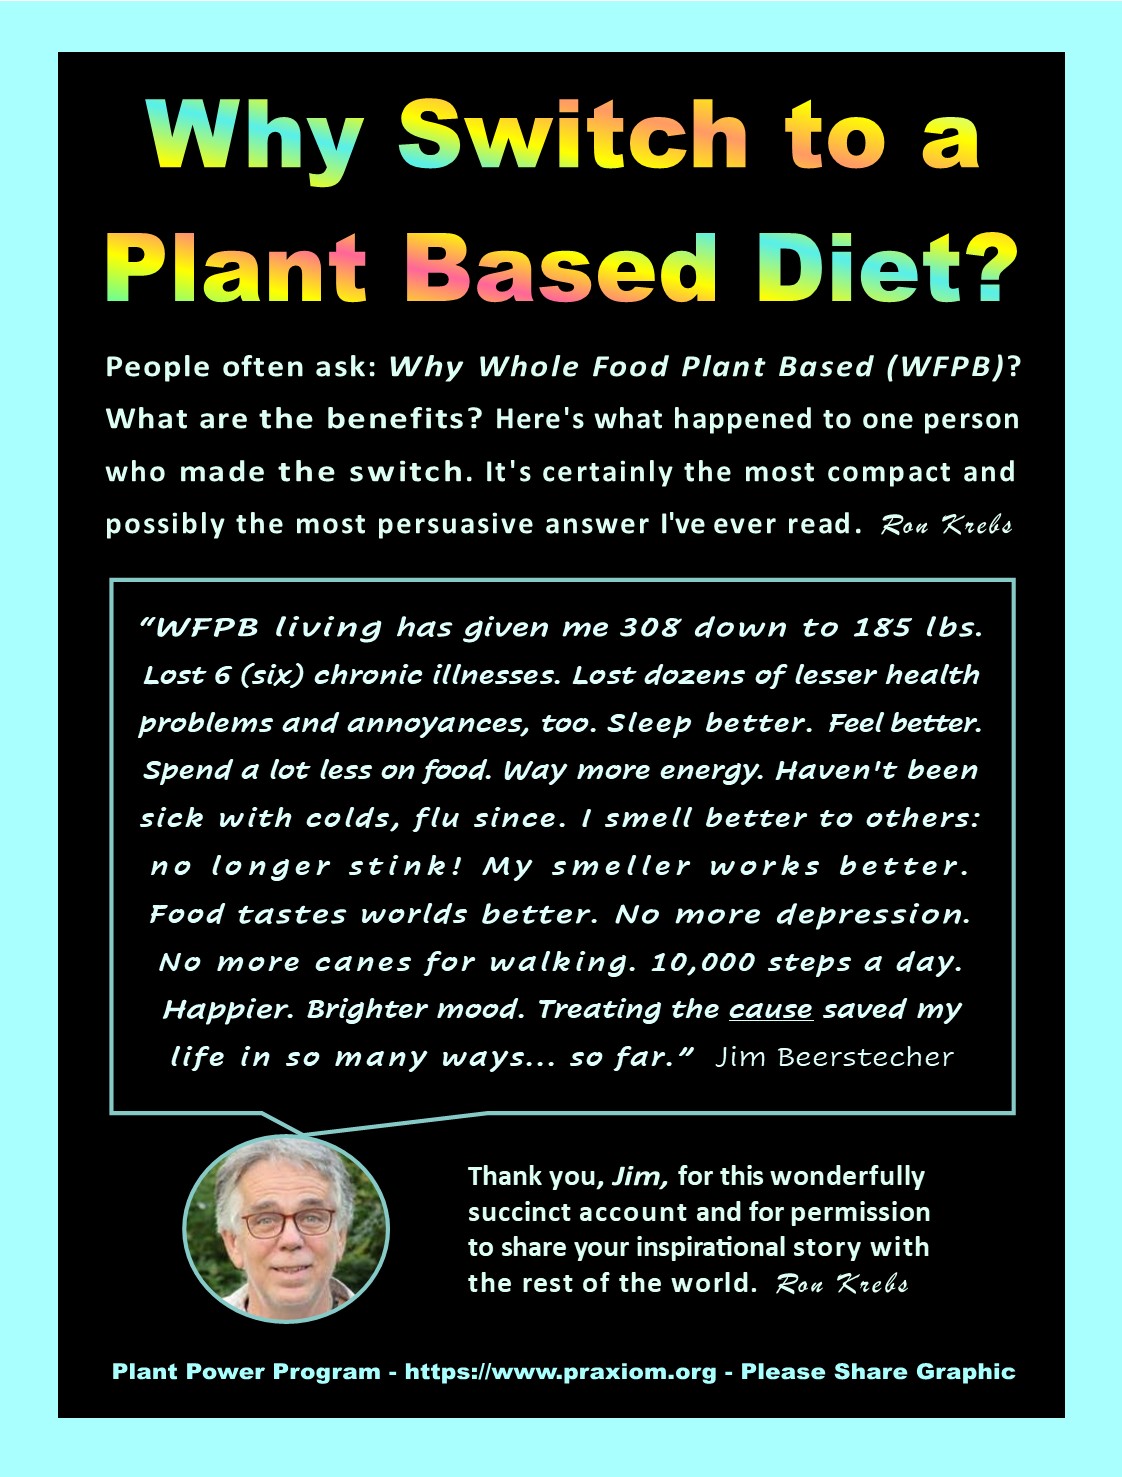 Why Switch to a Plant Based Diet? Jim Beerstecher